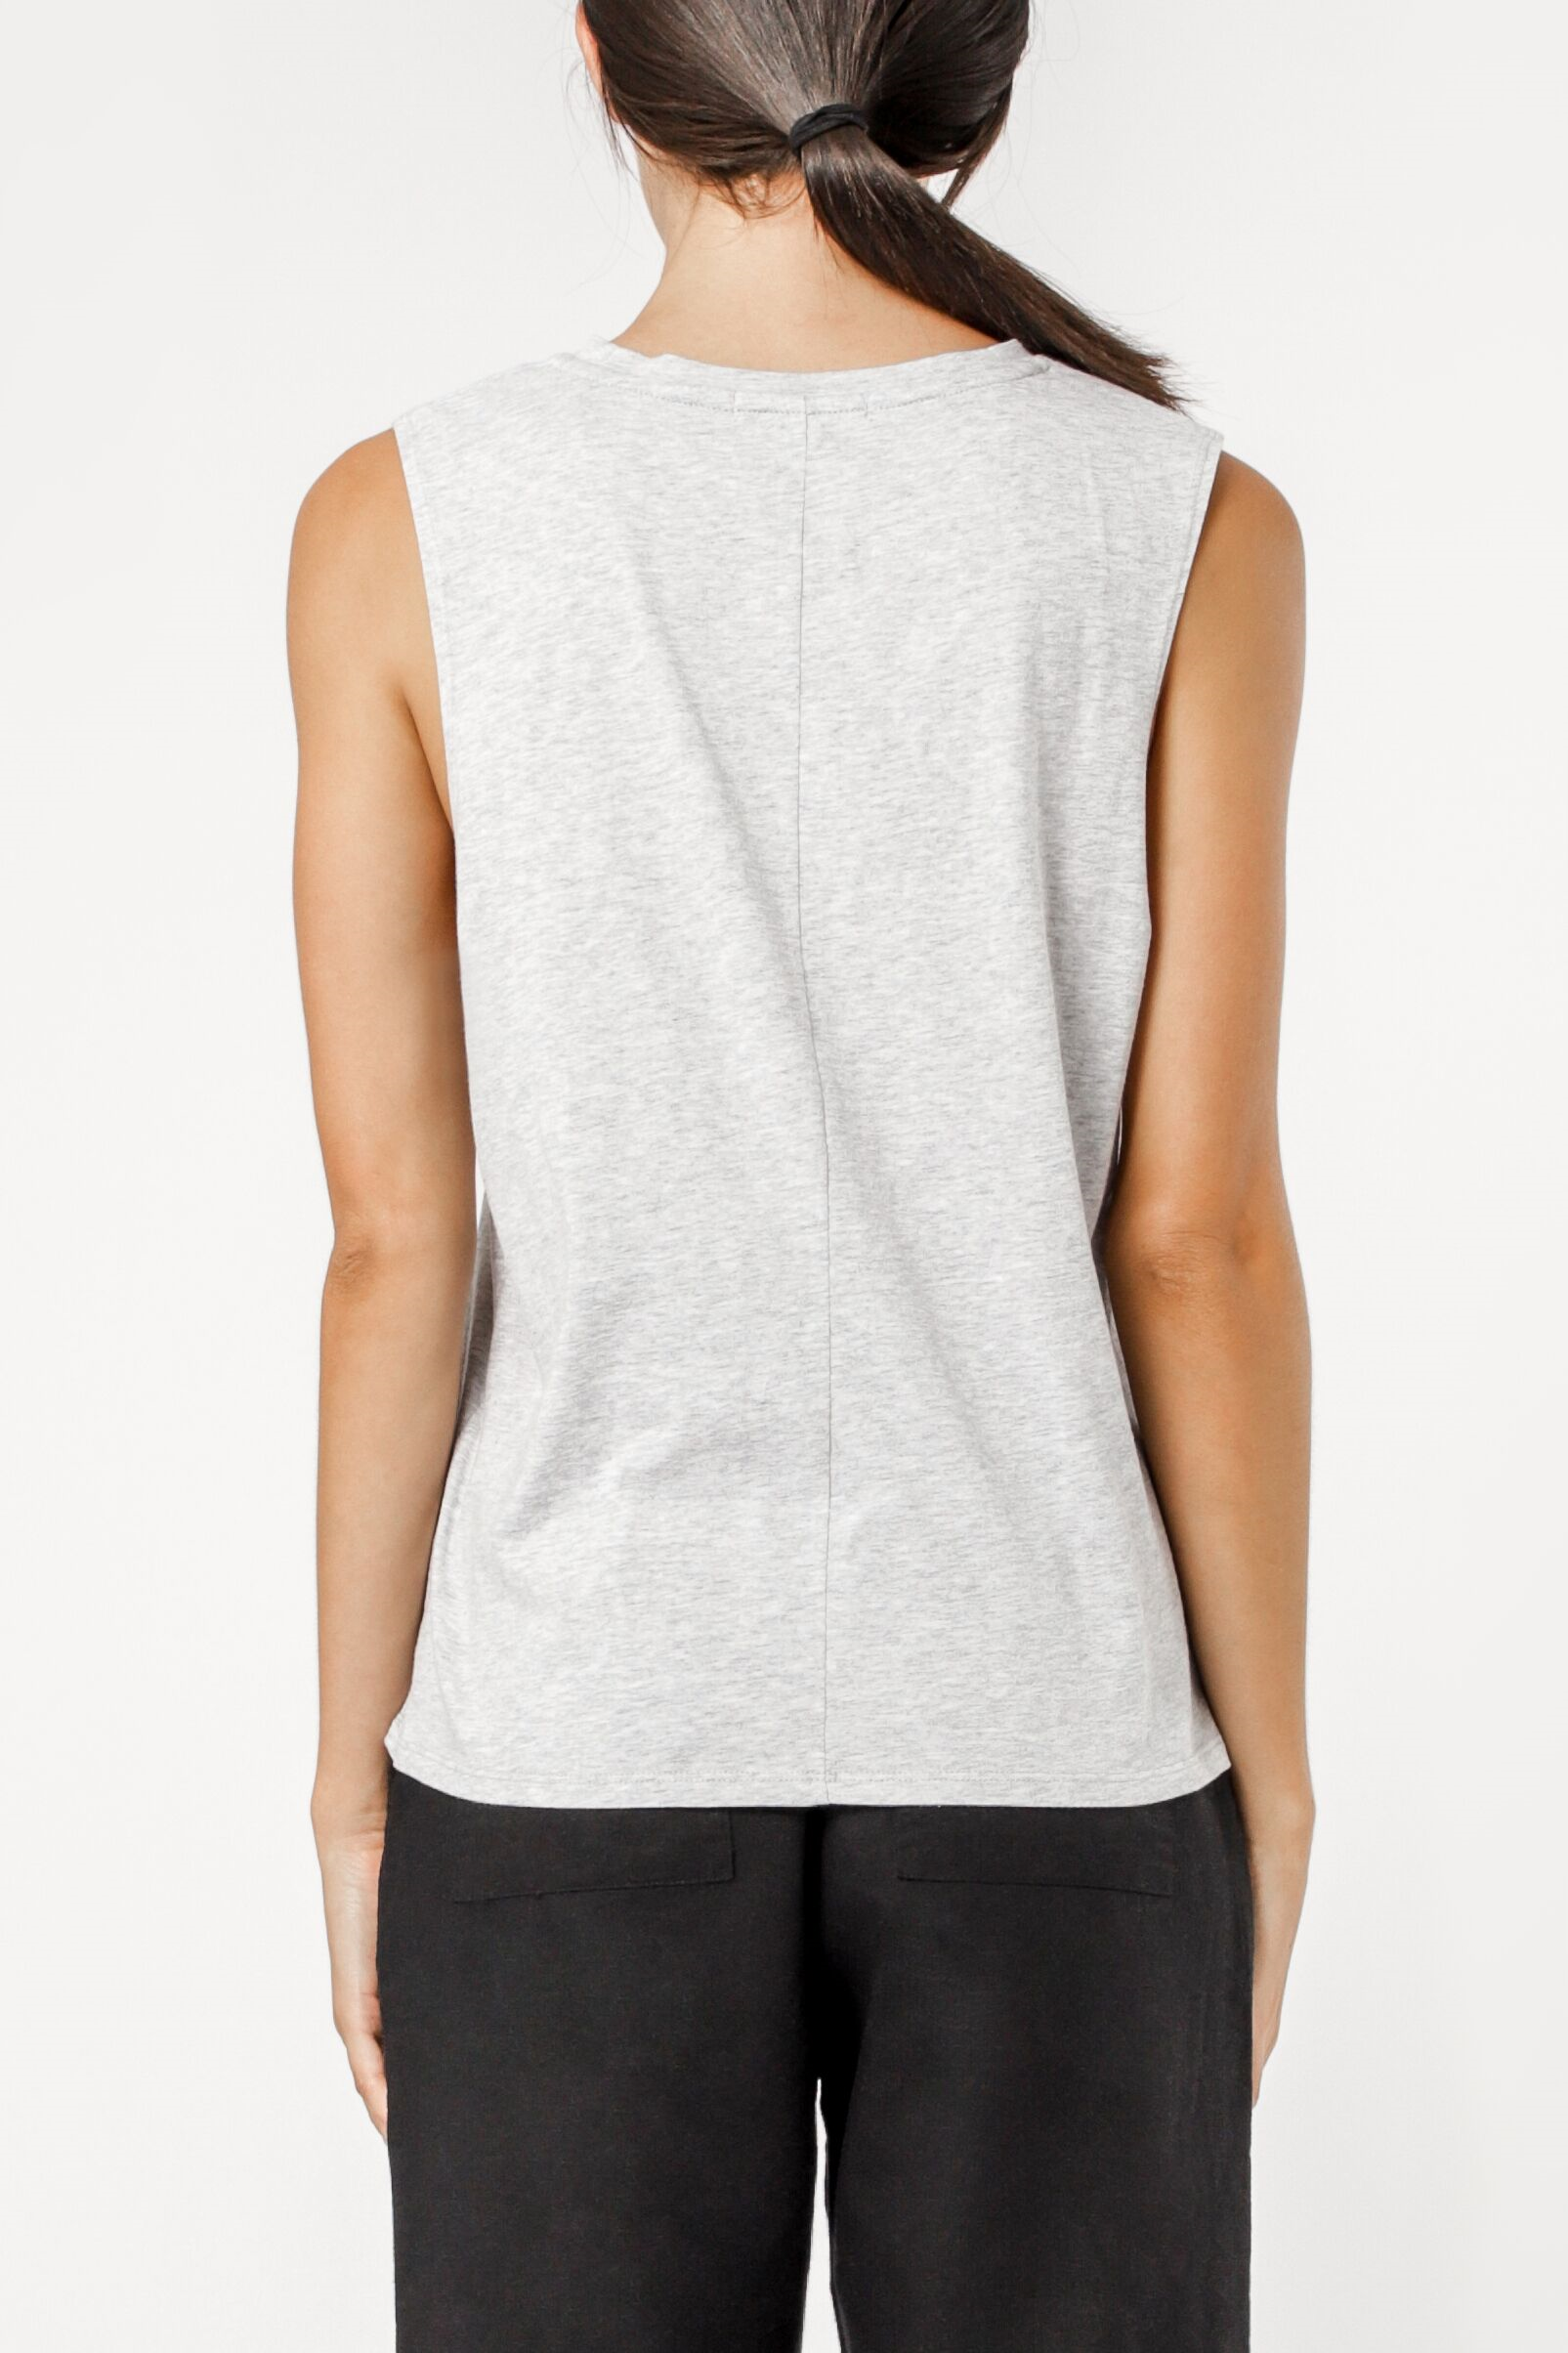 Nude Lucy keira basic muscle grey marle top, t shirt